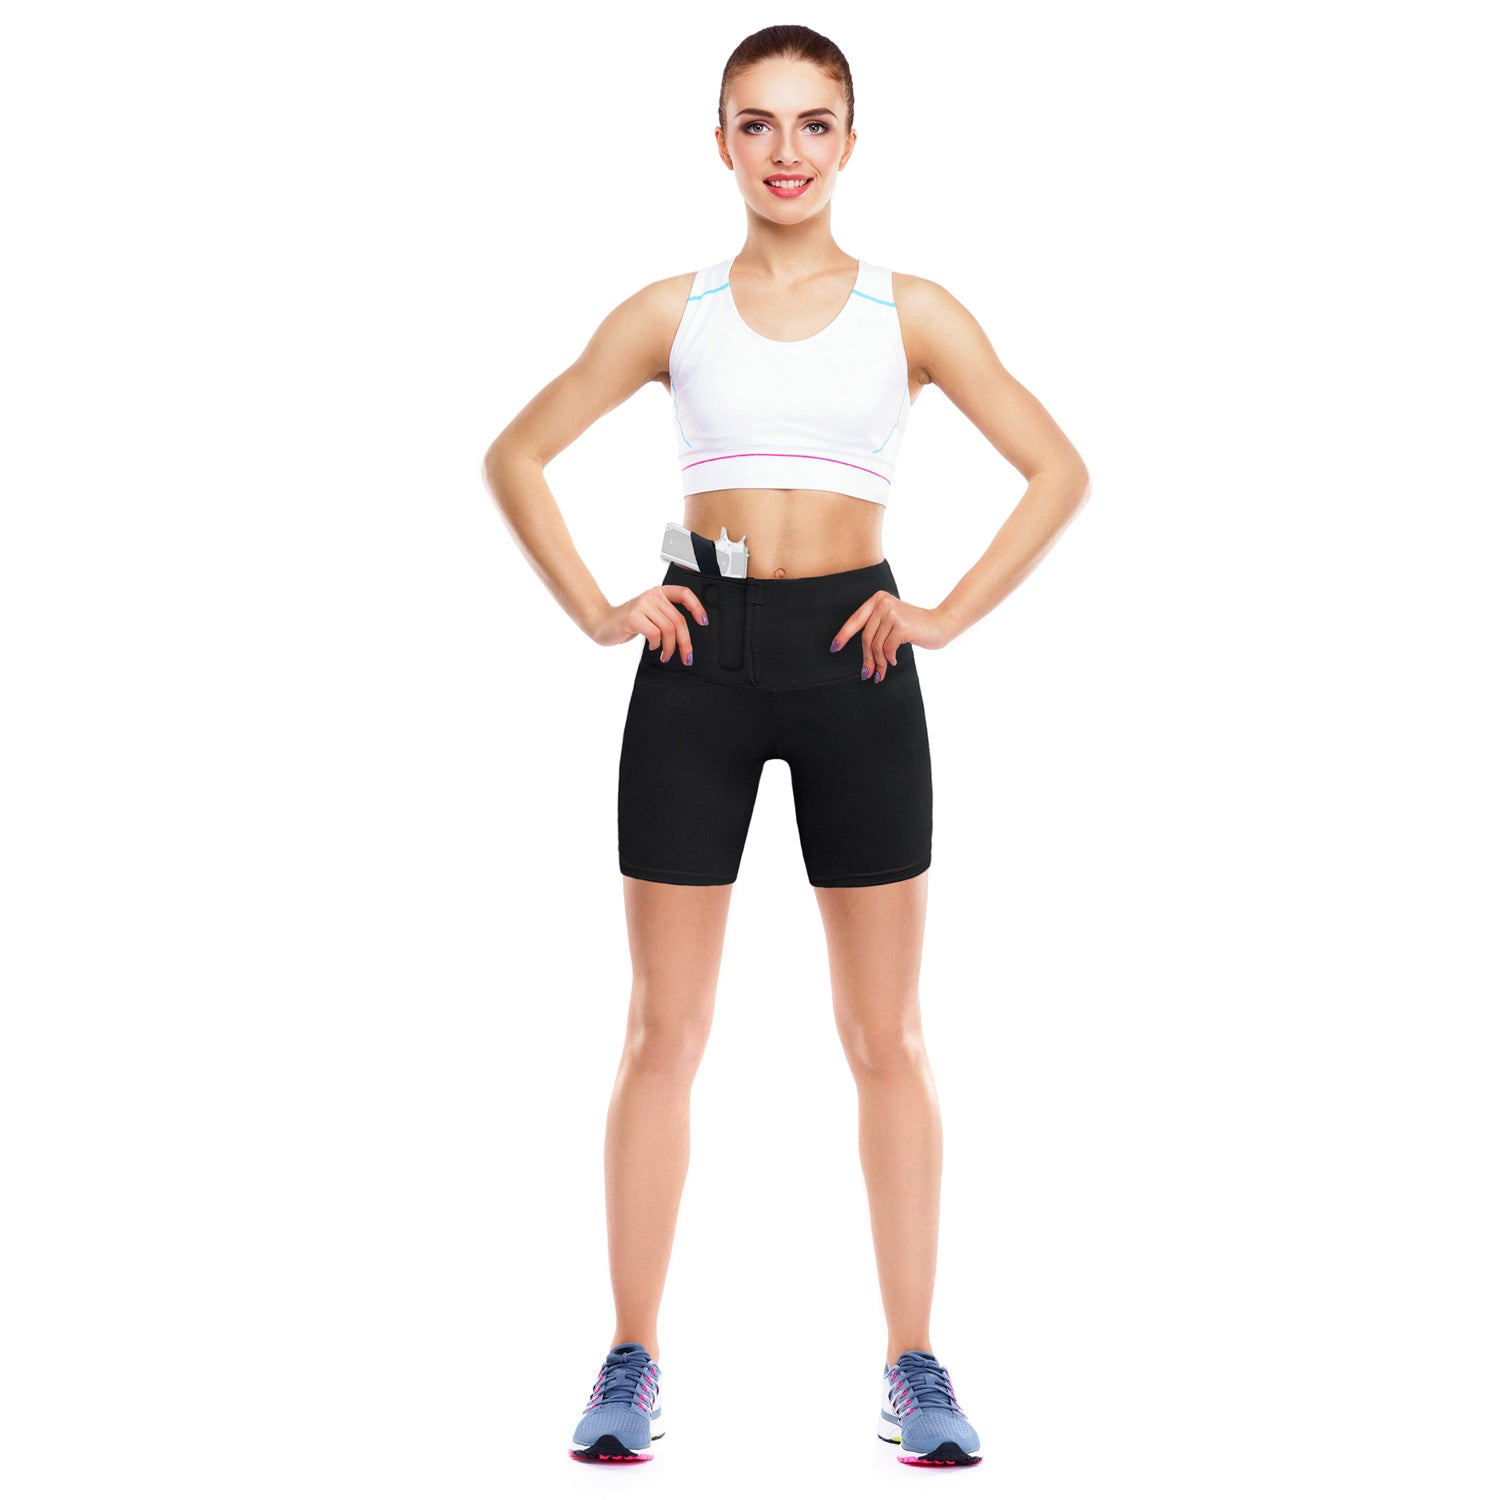 Women's Dual Holster Concealed Carry Shorts Leggings - Mid-thigh –